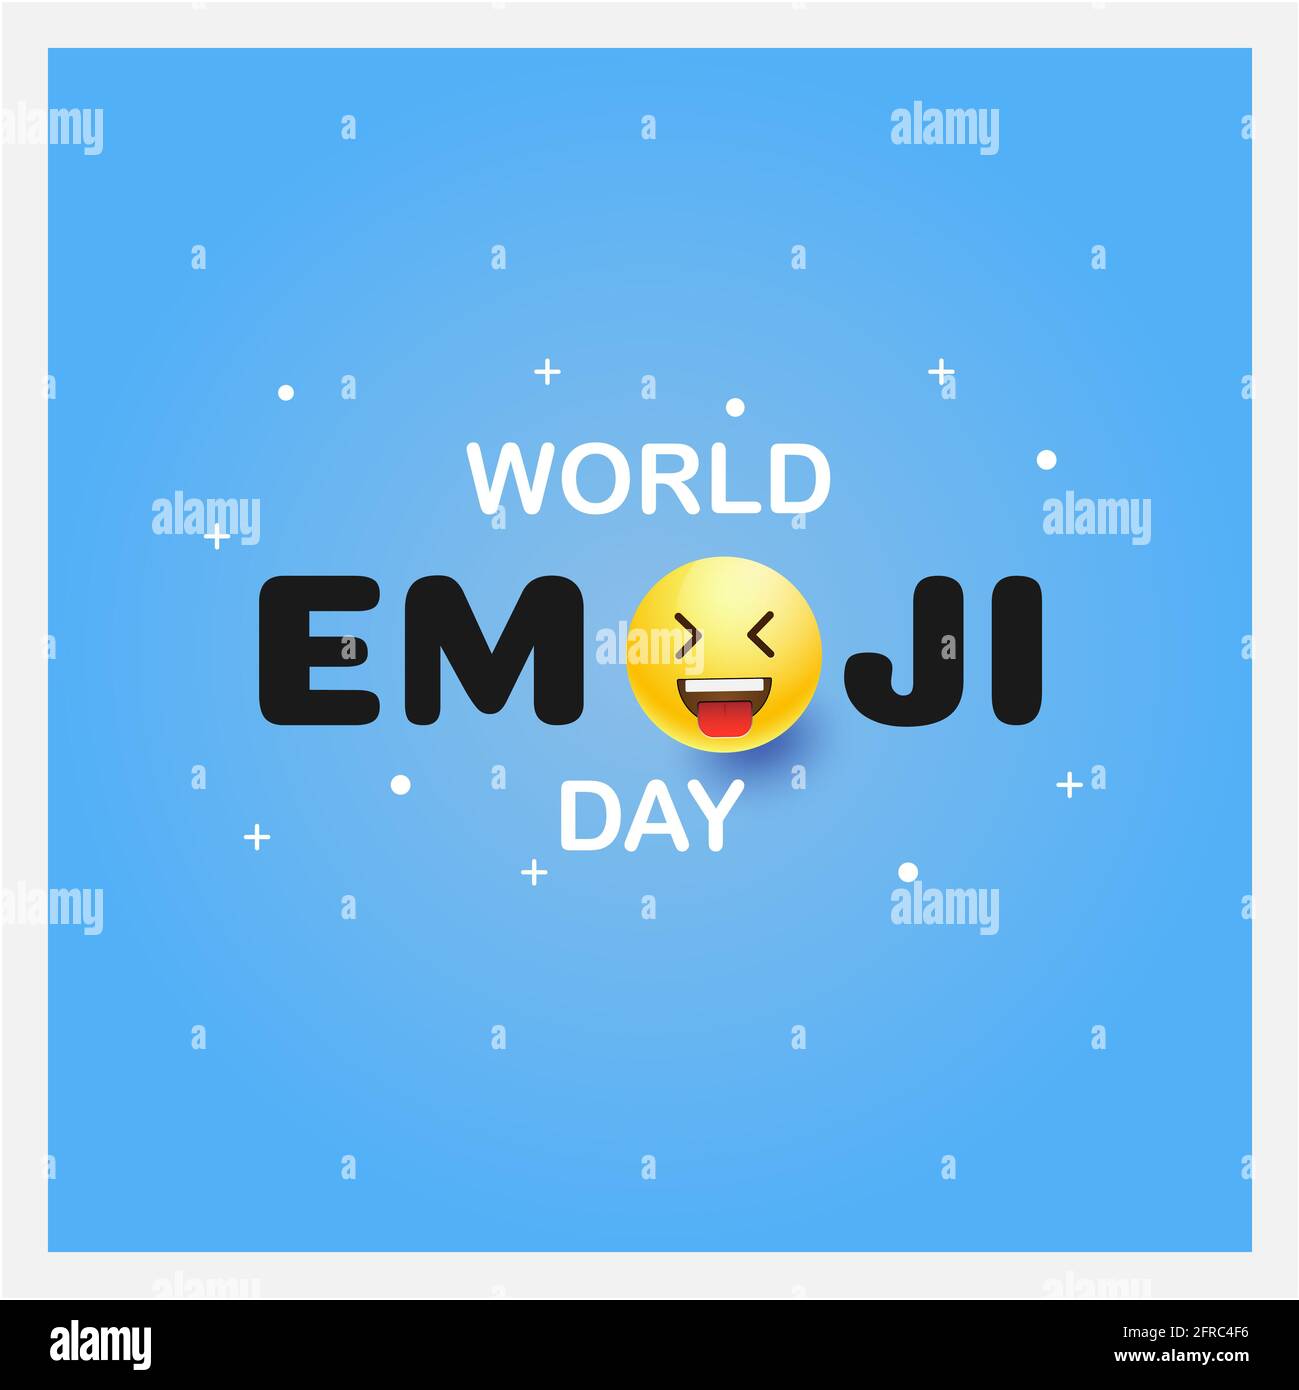 World emoji day greeting card and background template. Hand drawn. Flat design. Vector illustration. Stock Photo